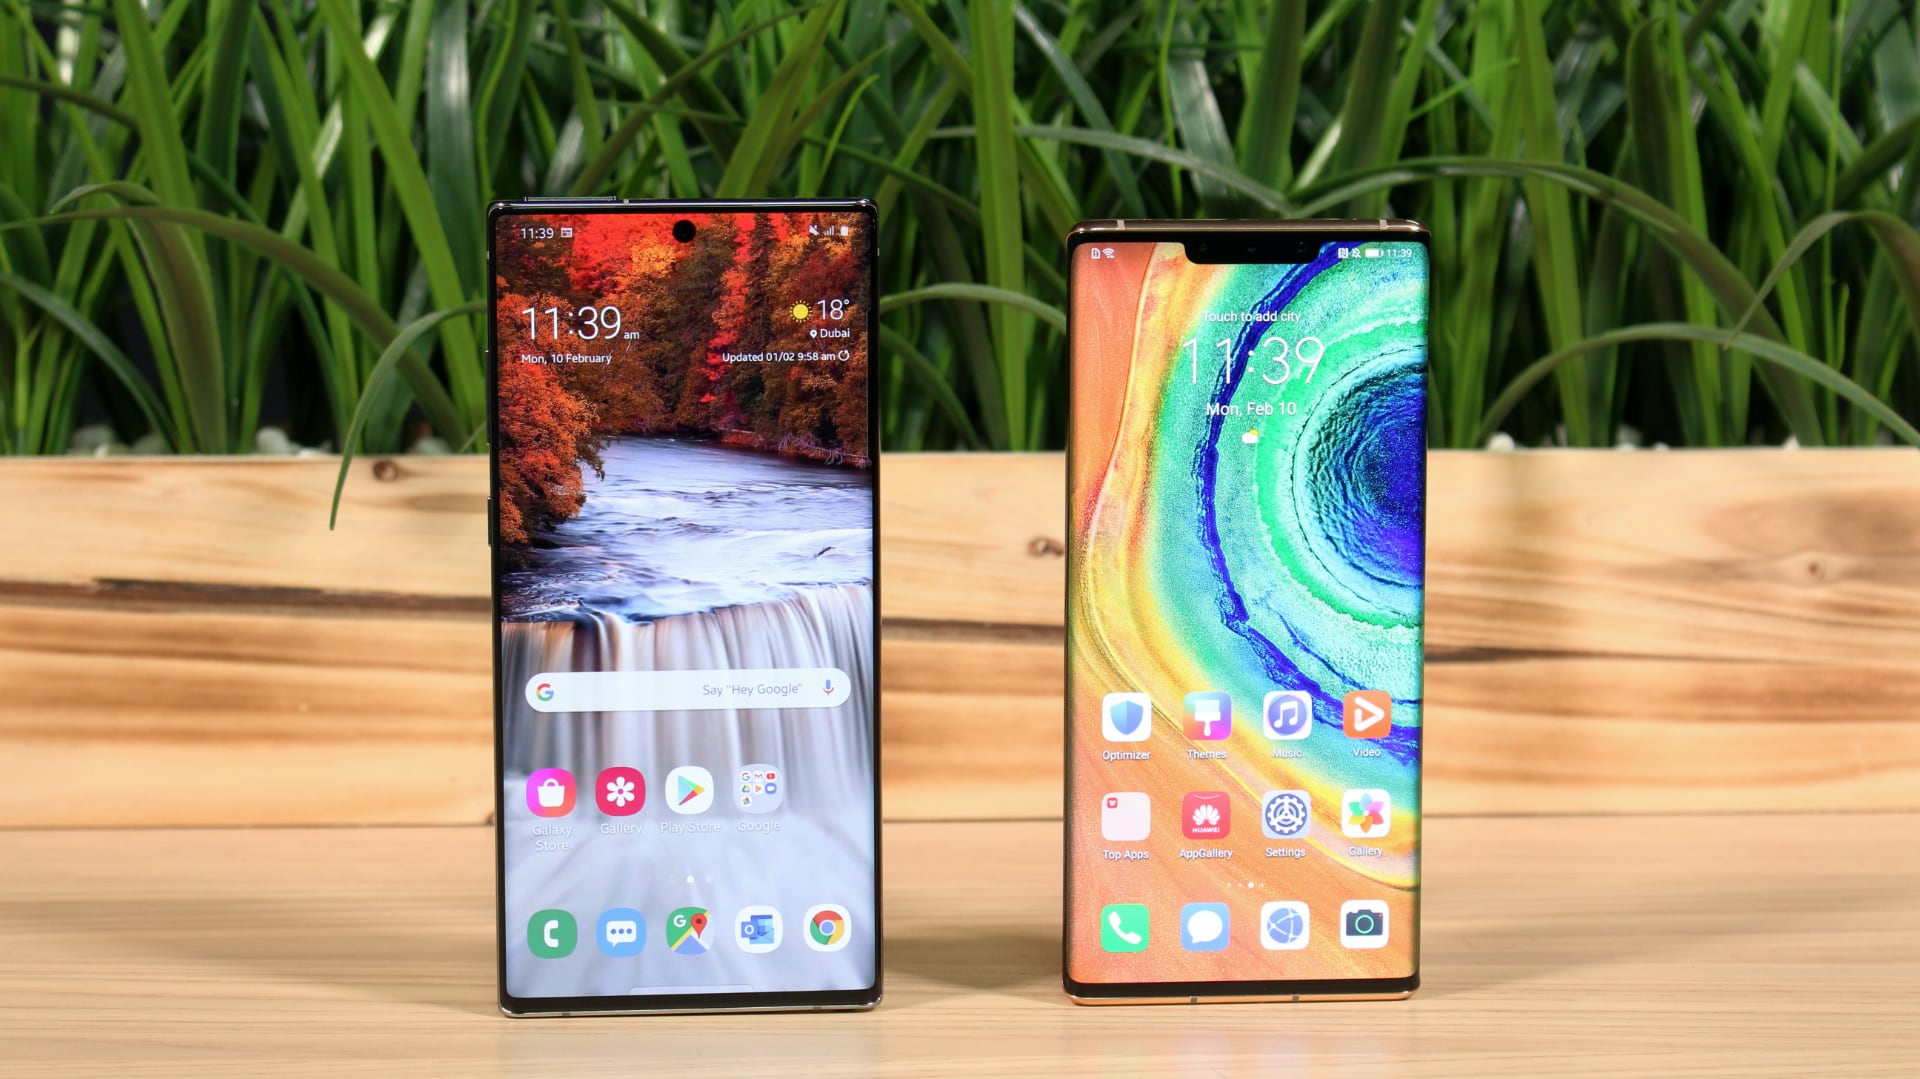 Note 30 vs note 12. Huawei Mate Note 10. Huawei Note 10 Pro. Samsung Note 30. Samsung Galaxy Note 20 Ultra vs Huawei Mate 30 Pro.